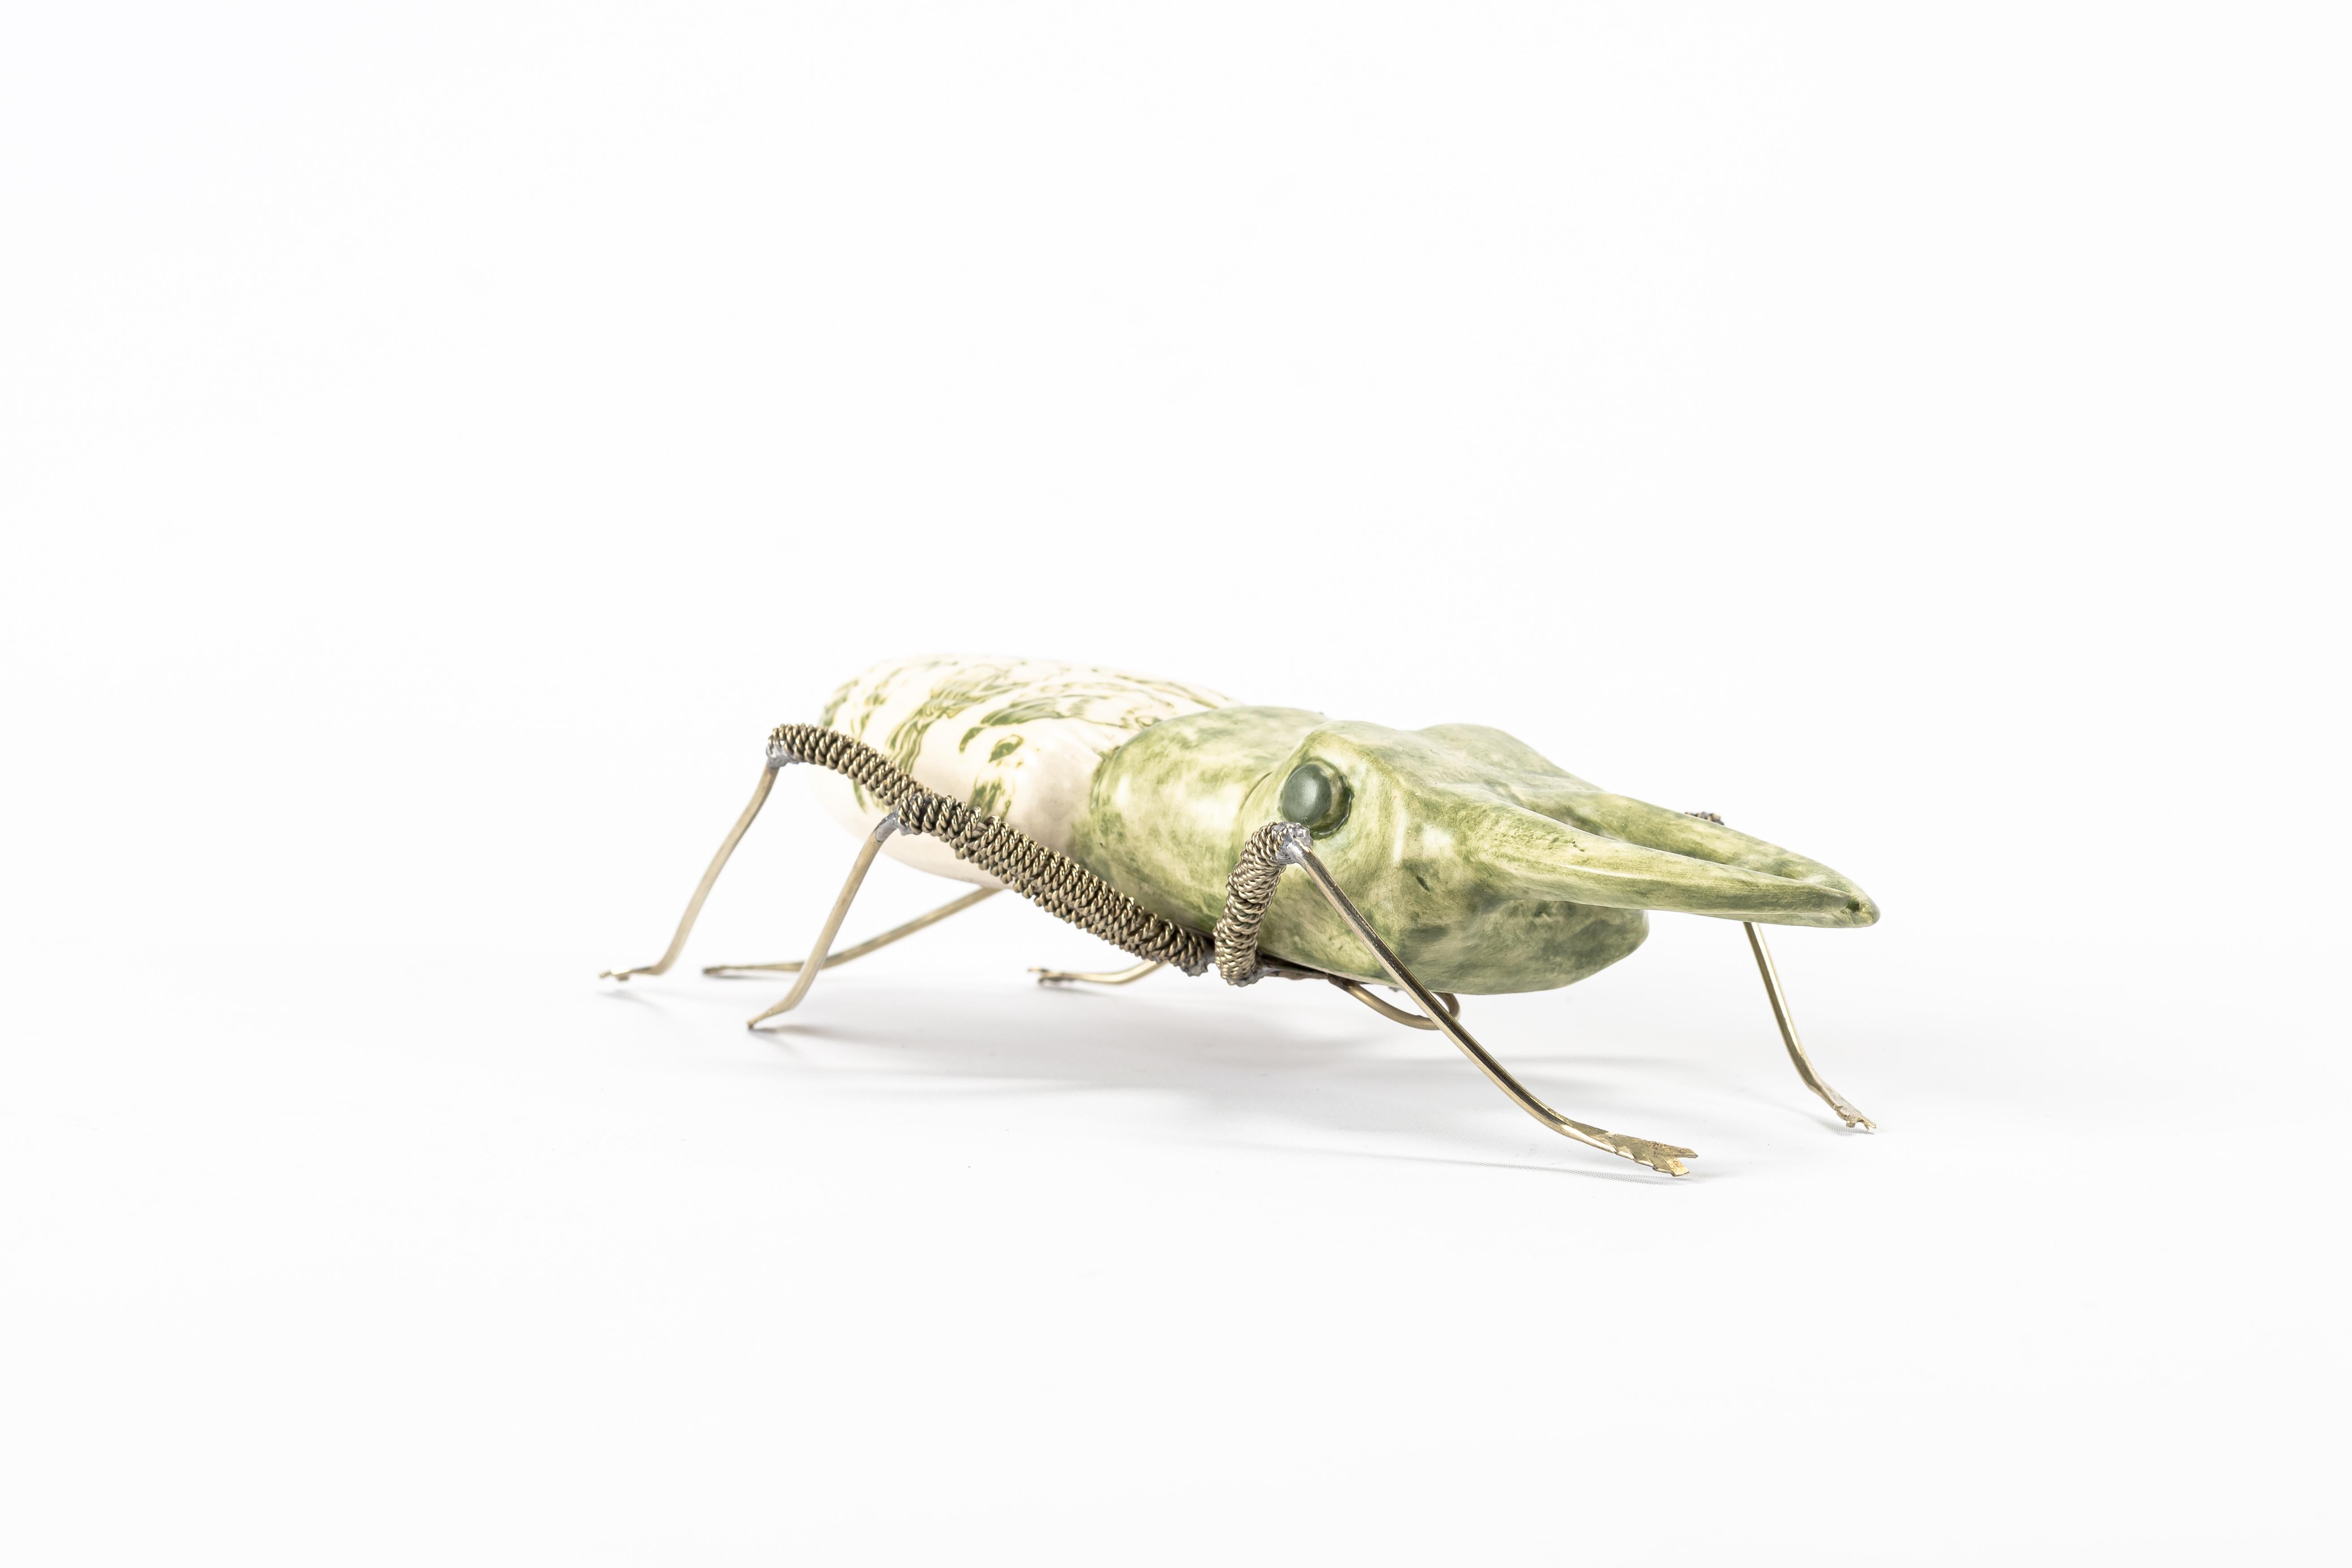 Other Ceramic Stag Beetle and White Metal by Estudio Guerrero